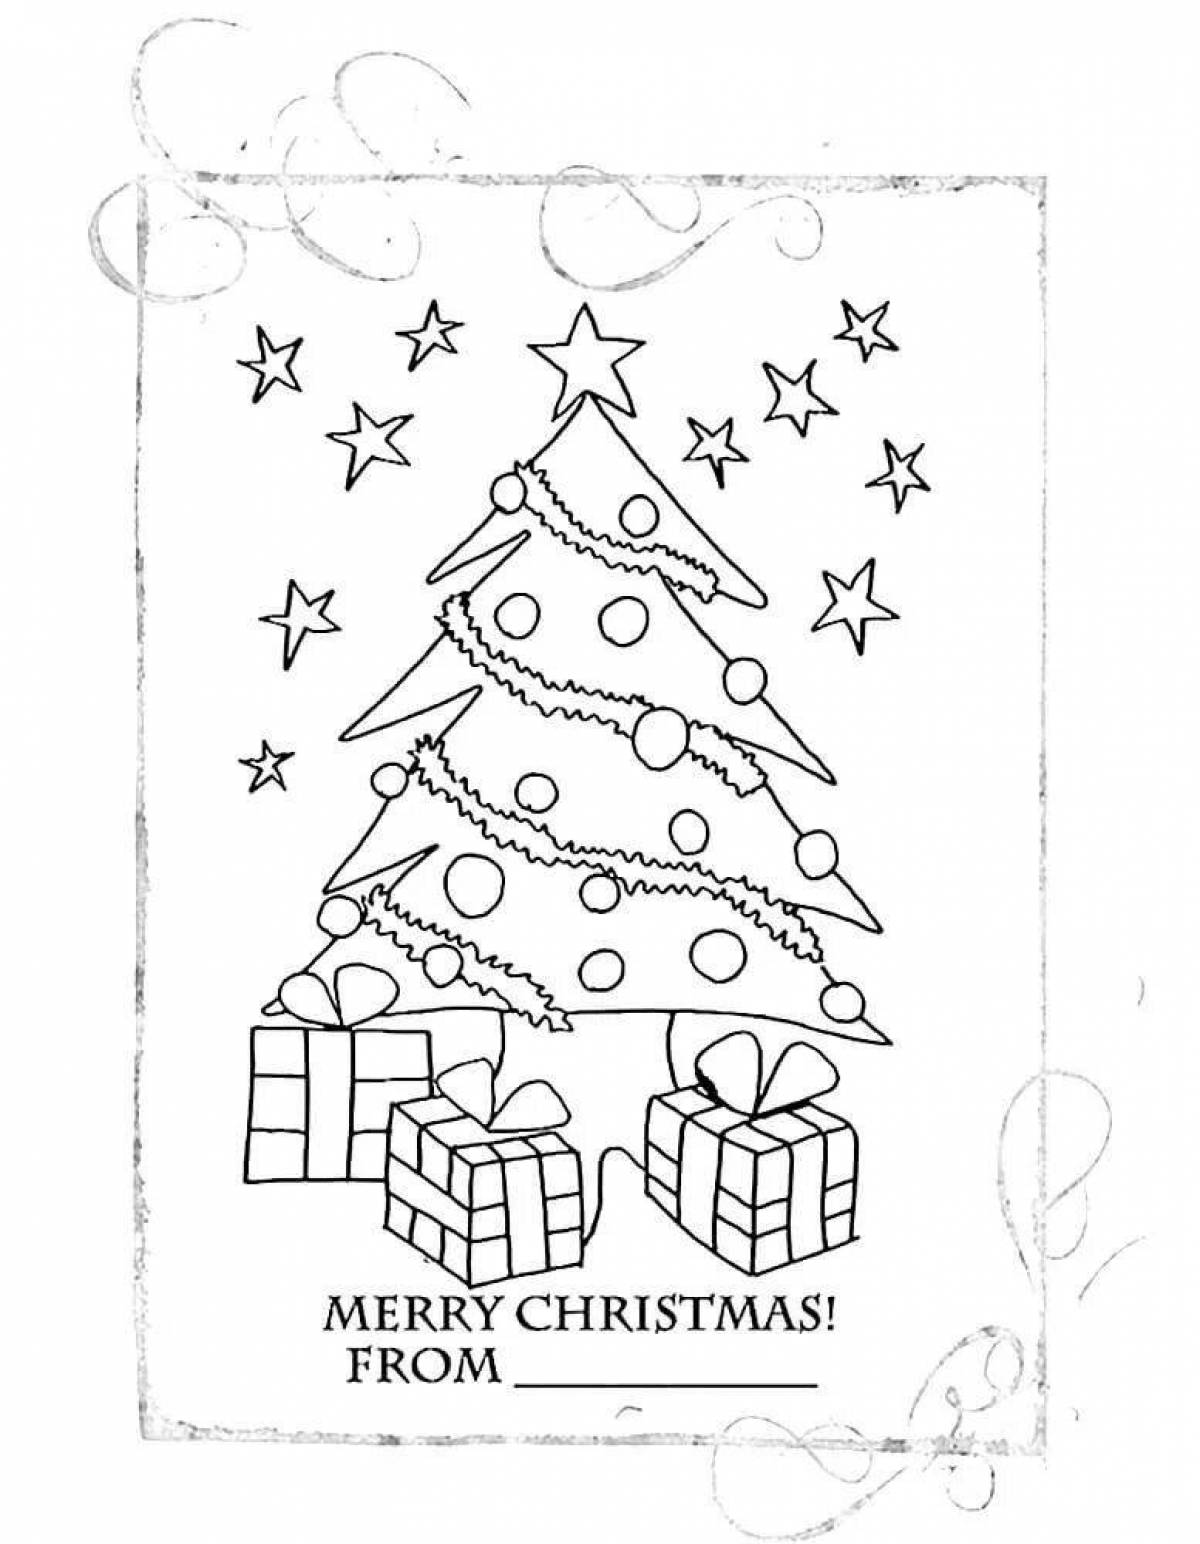 Witty Christmas card coloring book